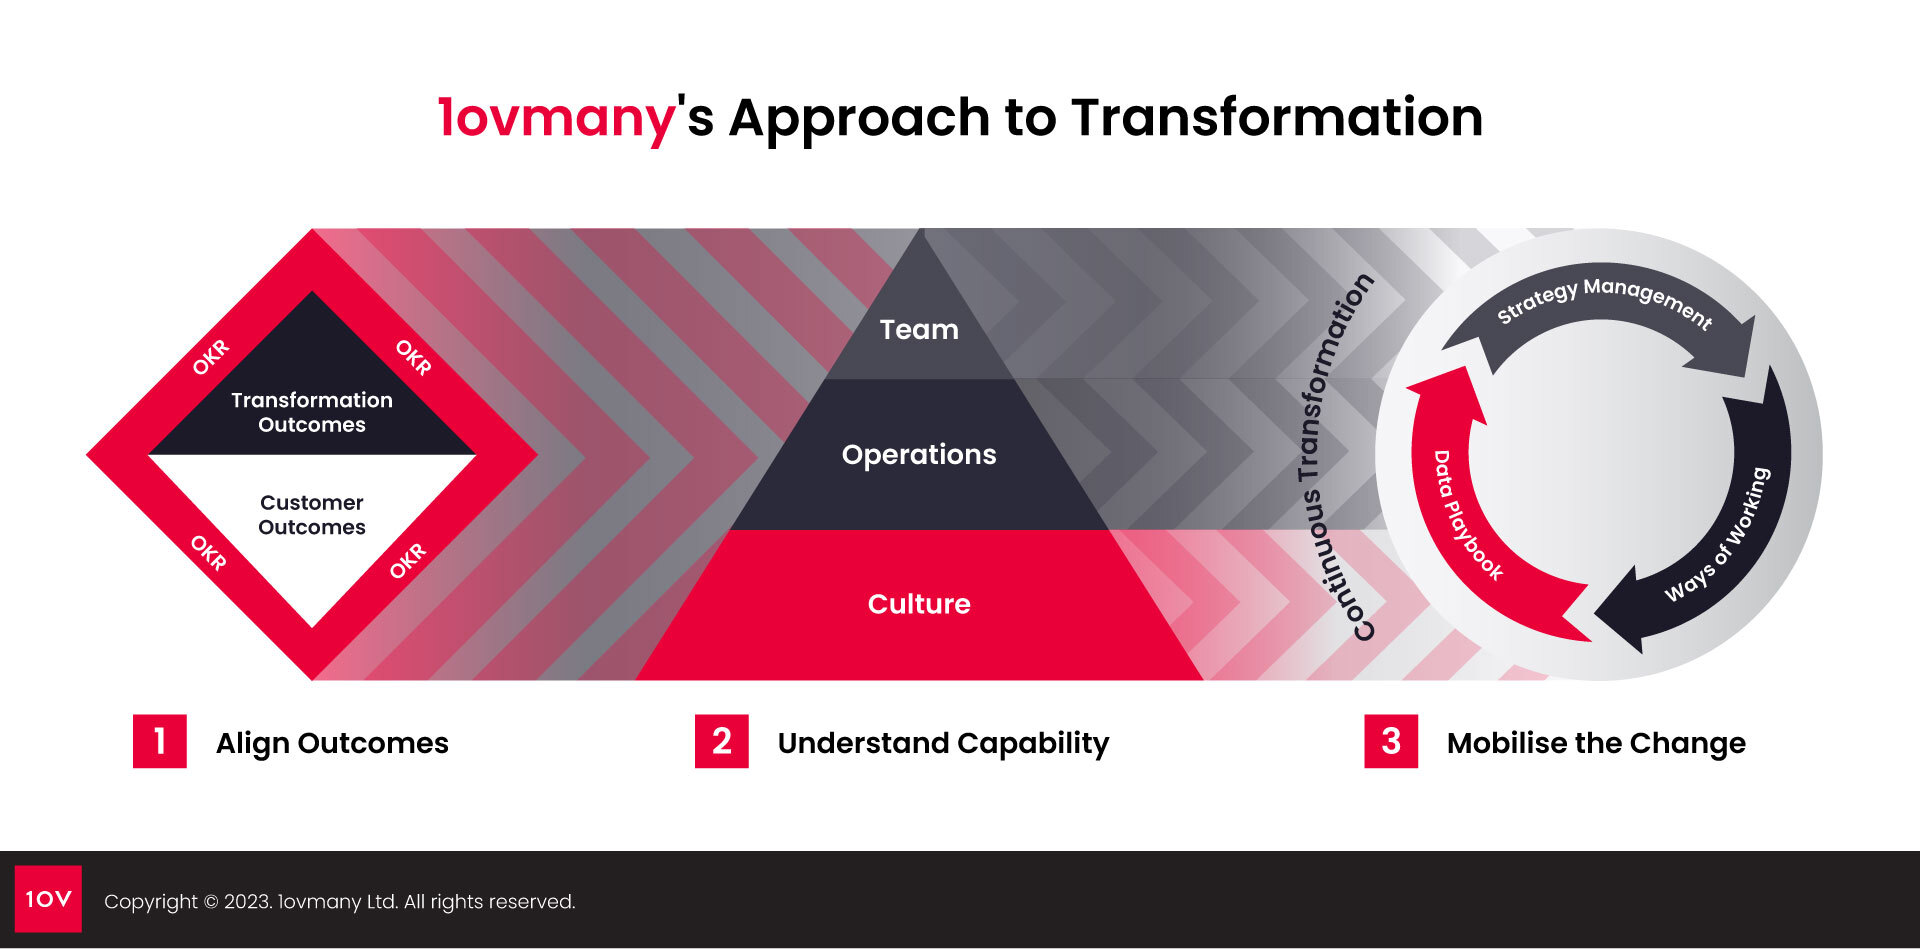 1ovmany's Digital Transformation Consulting approach